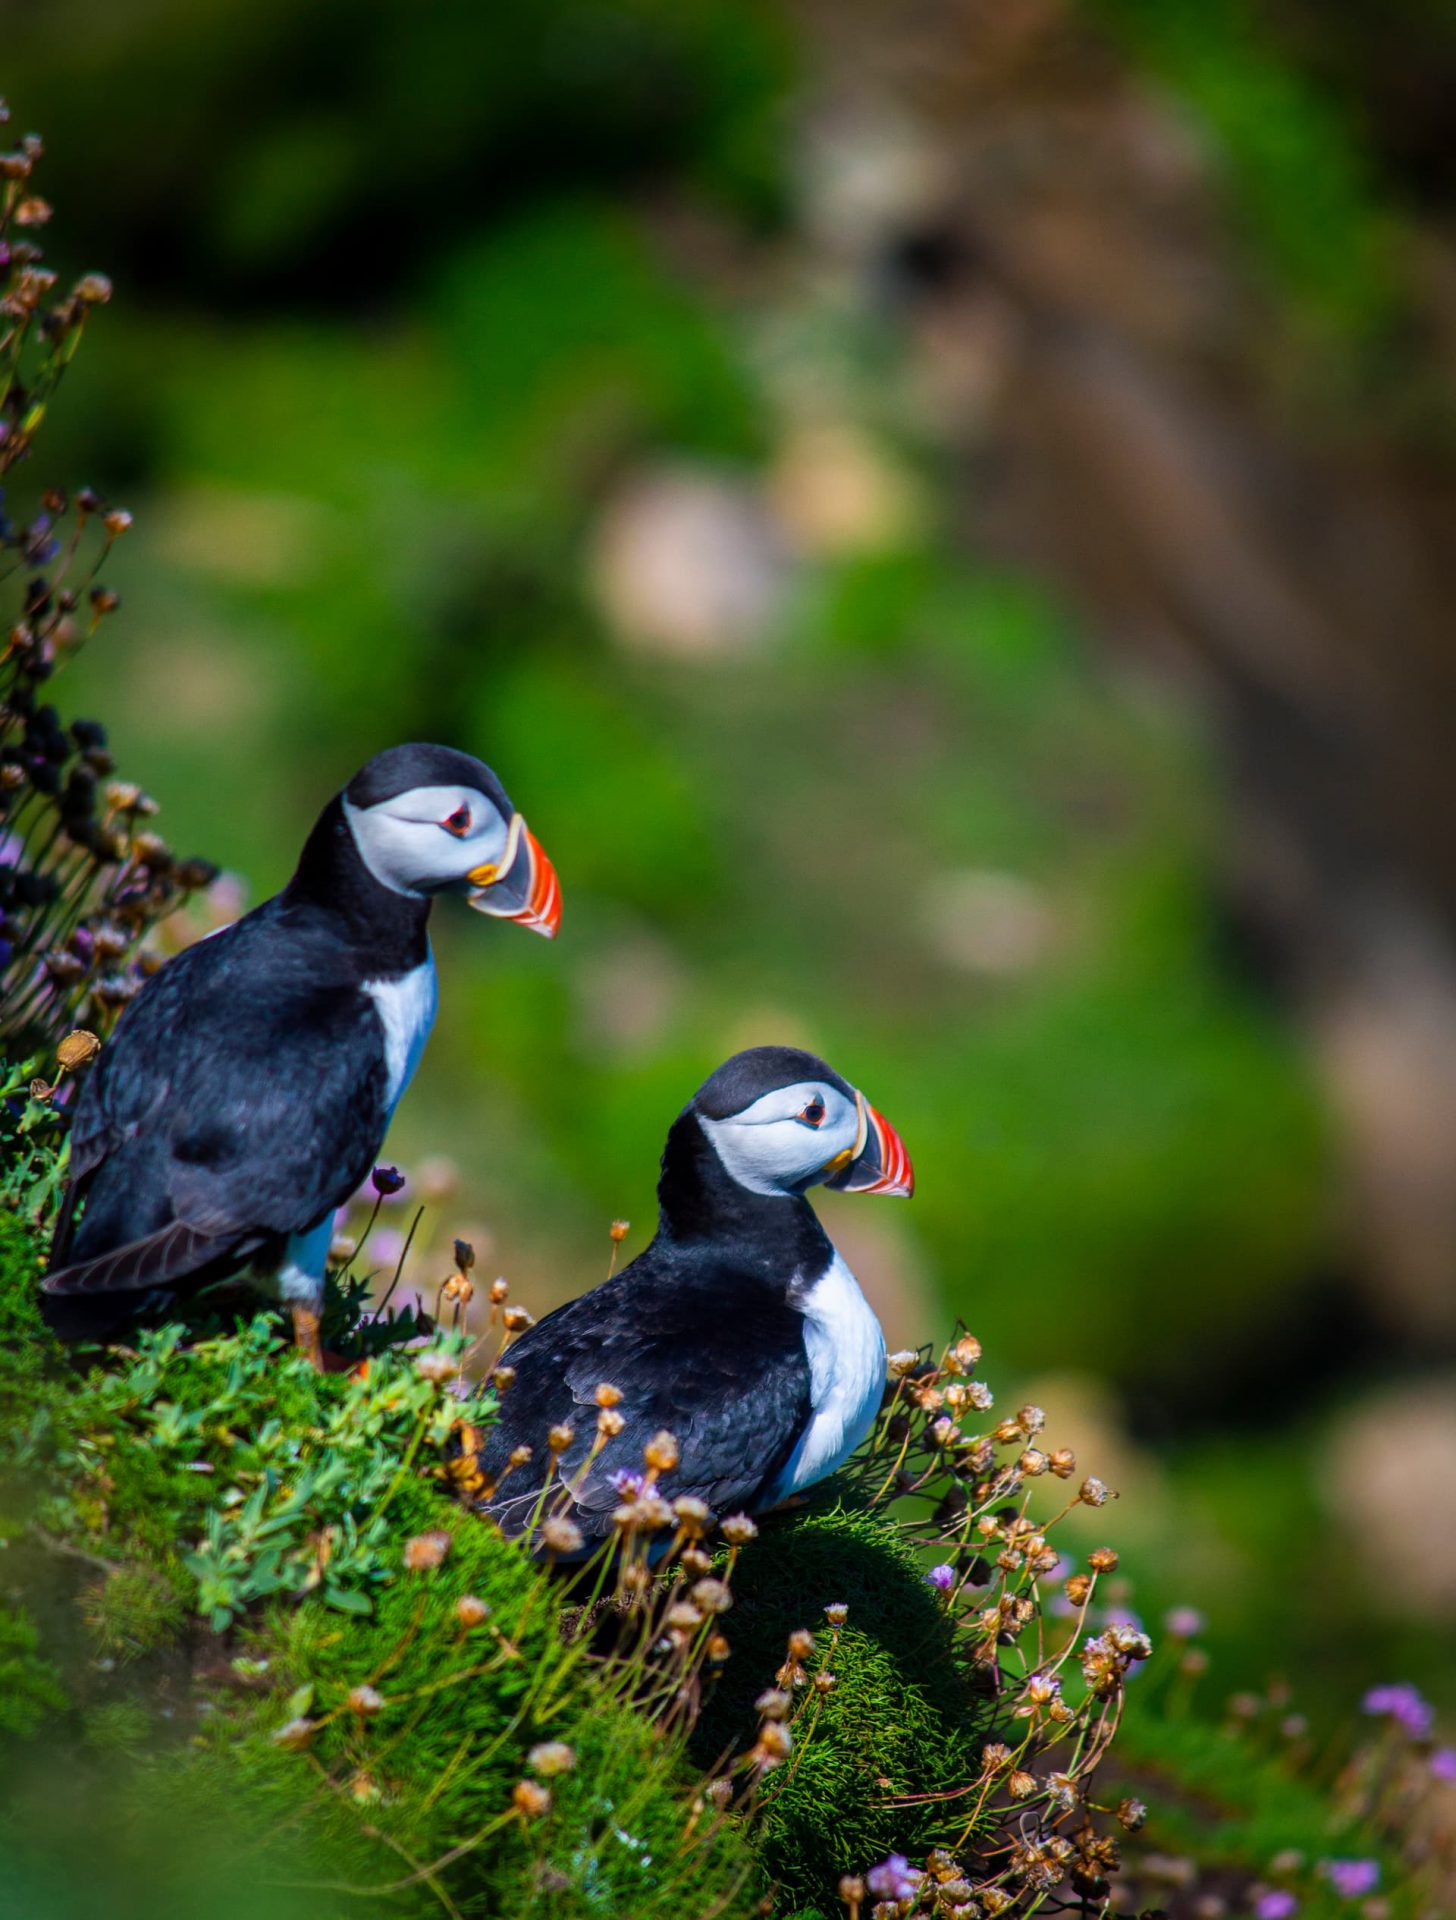 Two Puffin Birds